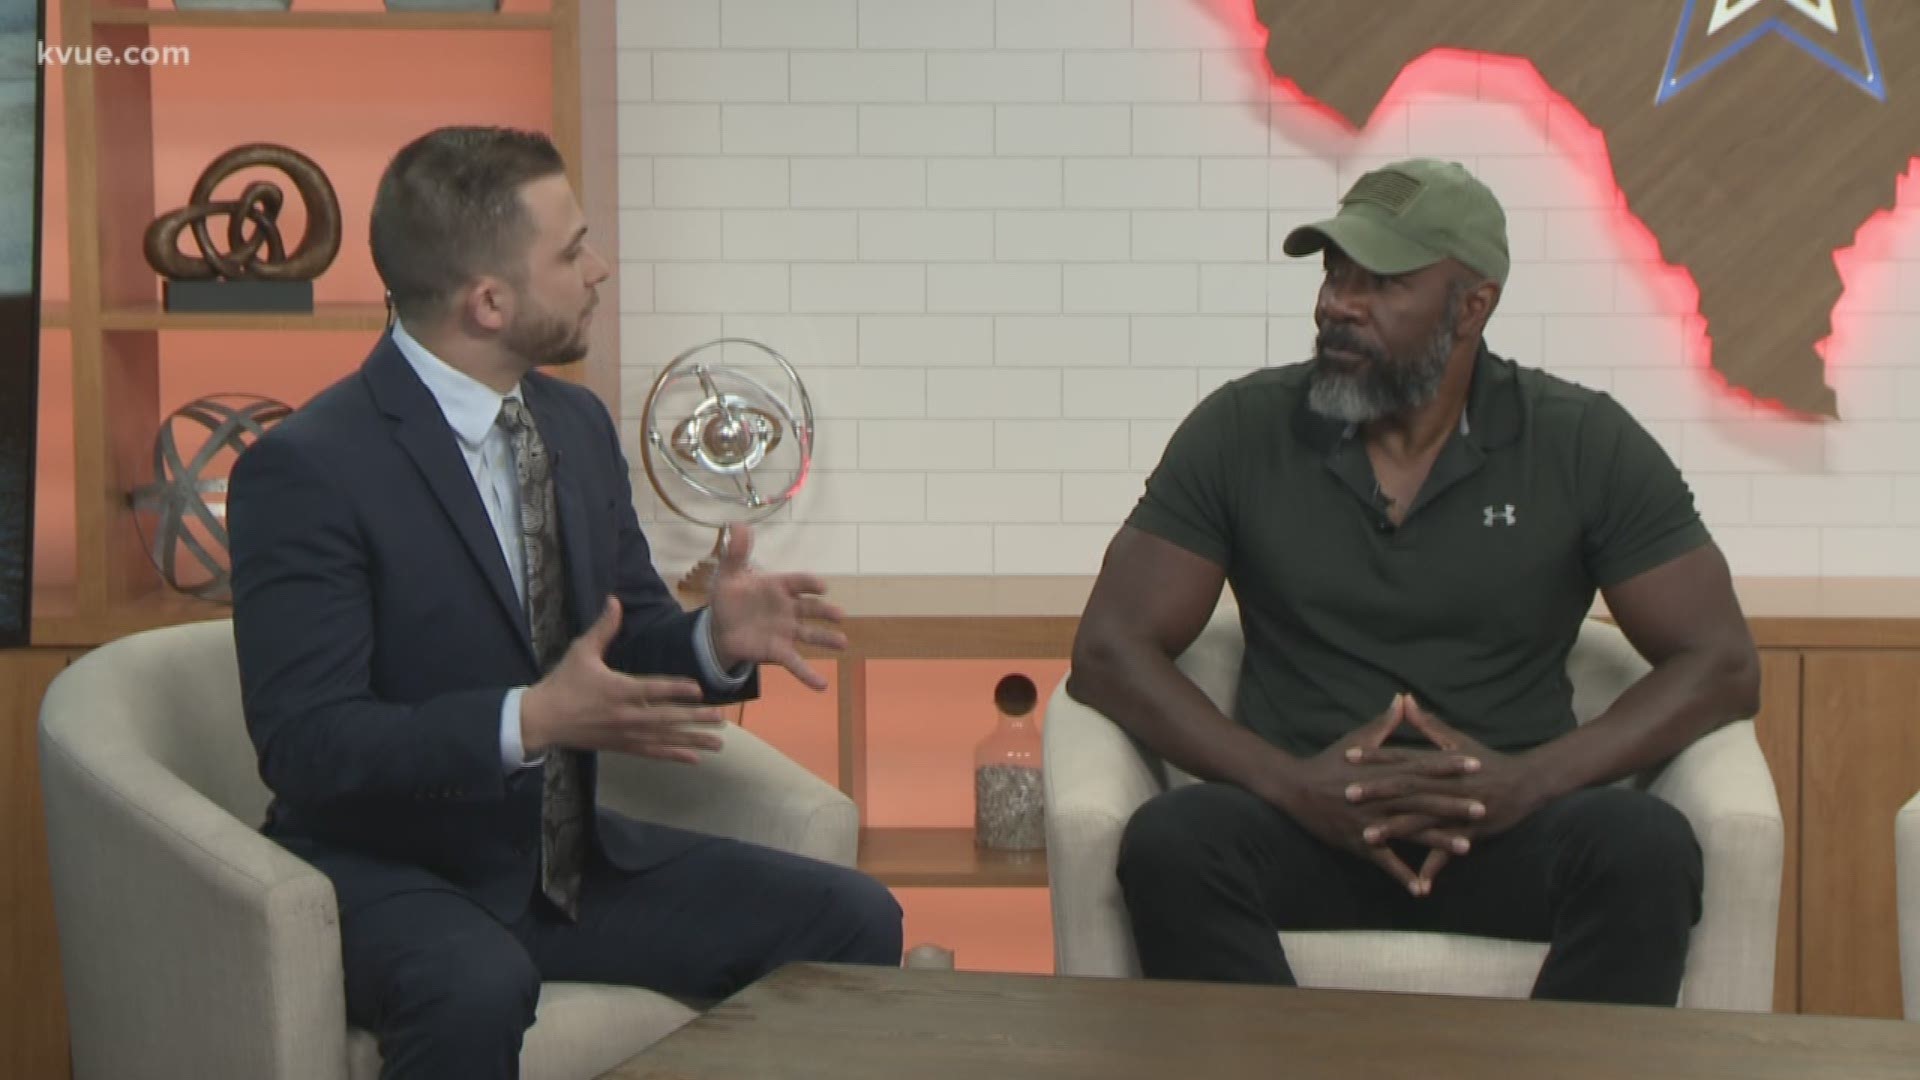 Friday is World Water Day. Joining us at KVUE is Moses West, who runs a water rescue foundation to bring fresh drinking water to anywhere in the world. He’s here to give us an update on his mission.